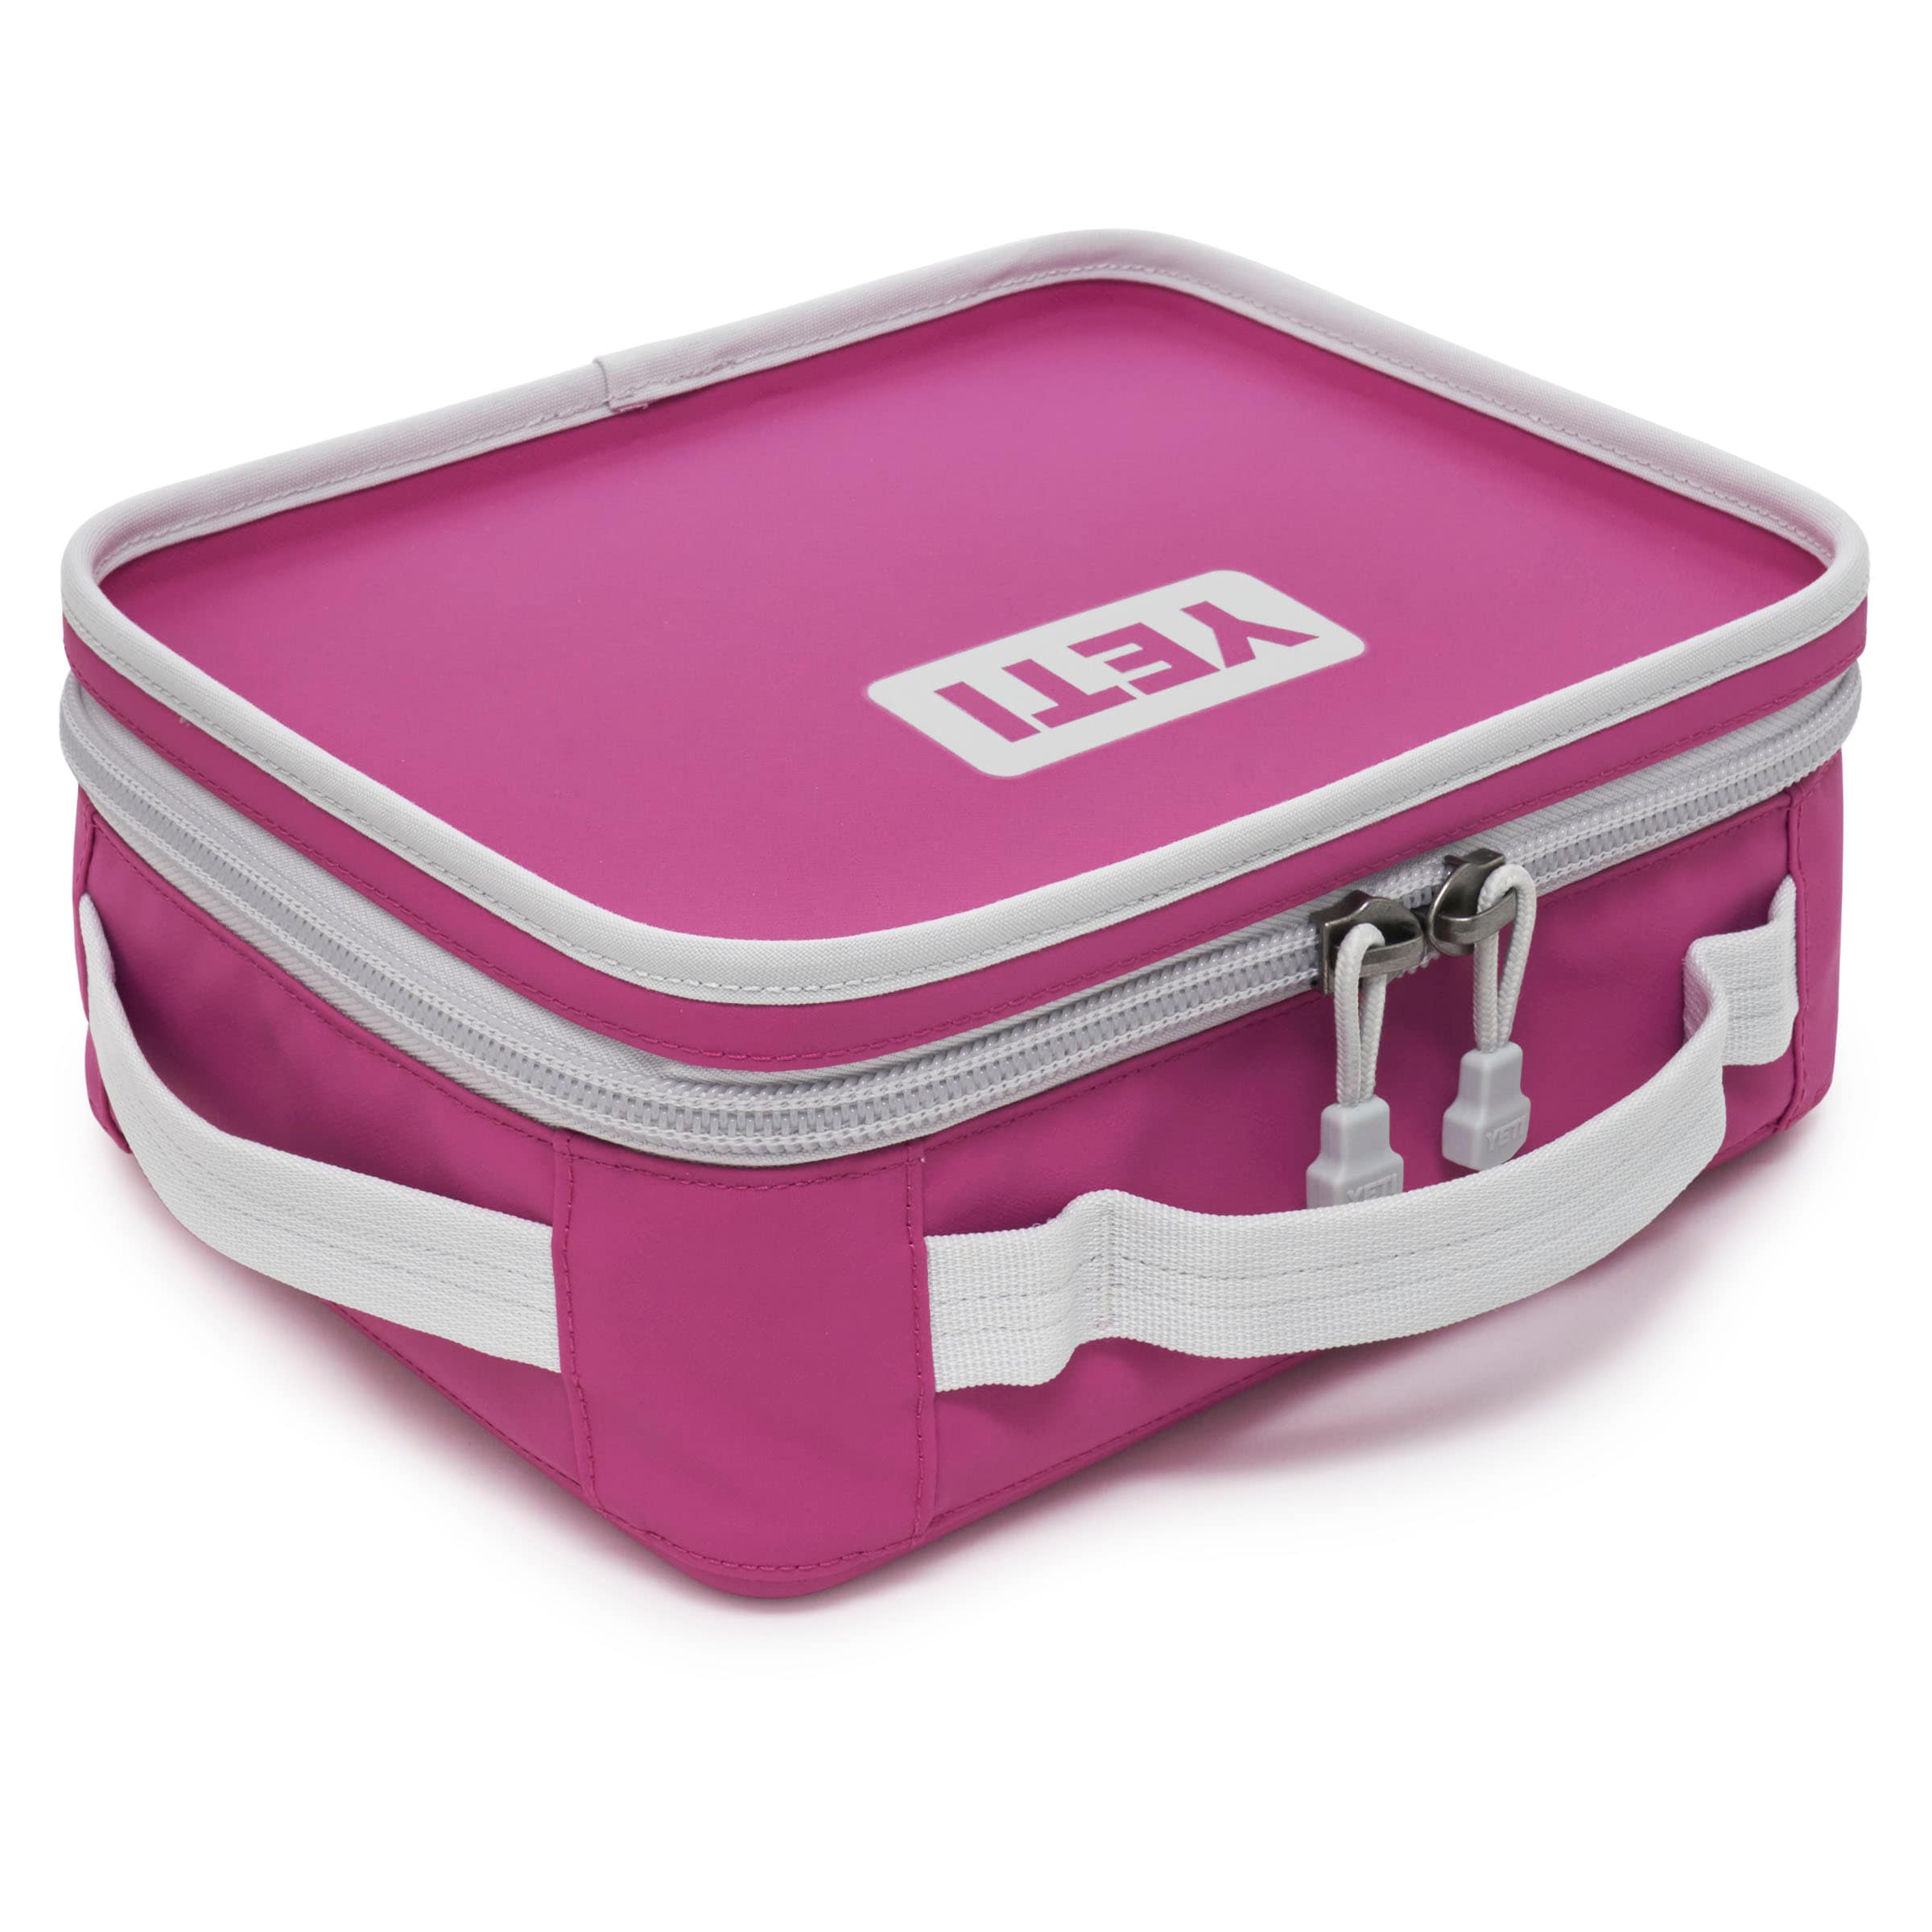 Ice pink yeti lunch boxes 👀 : r/YetiCoolers